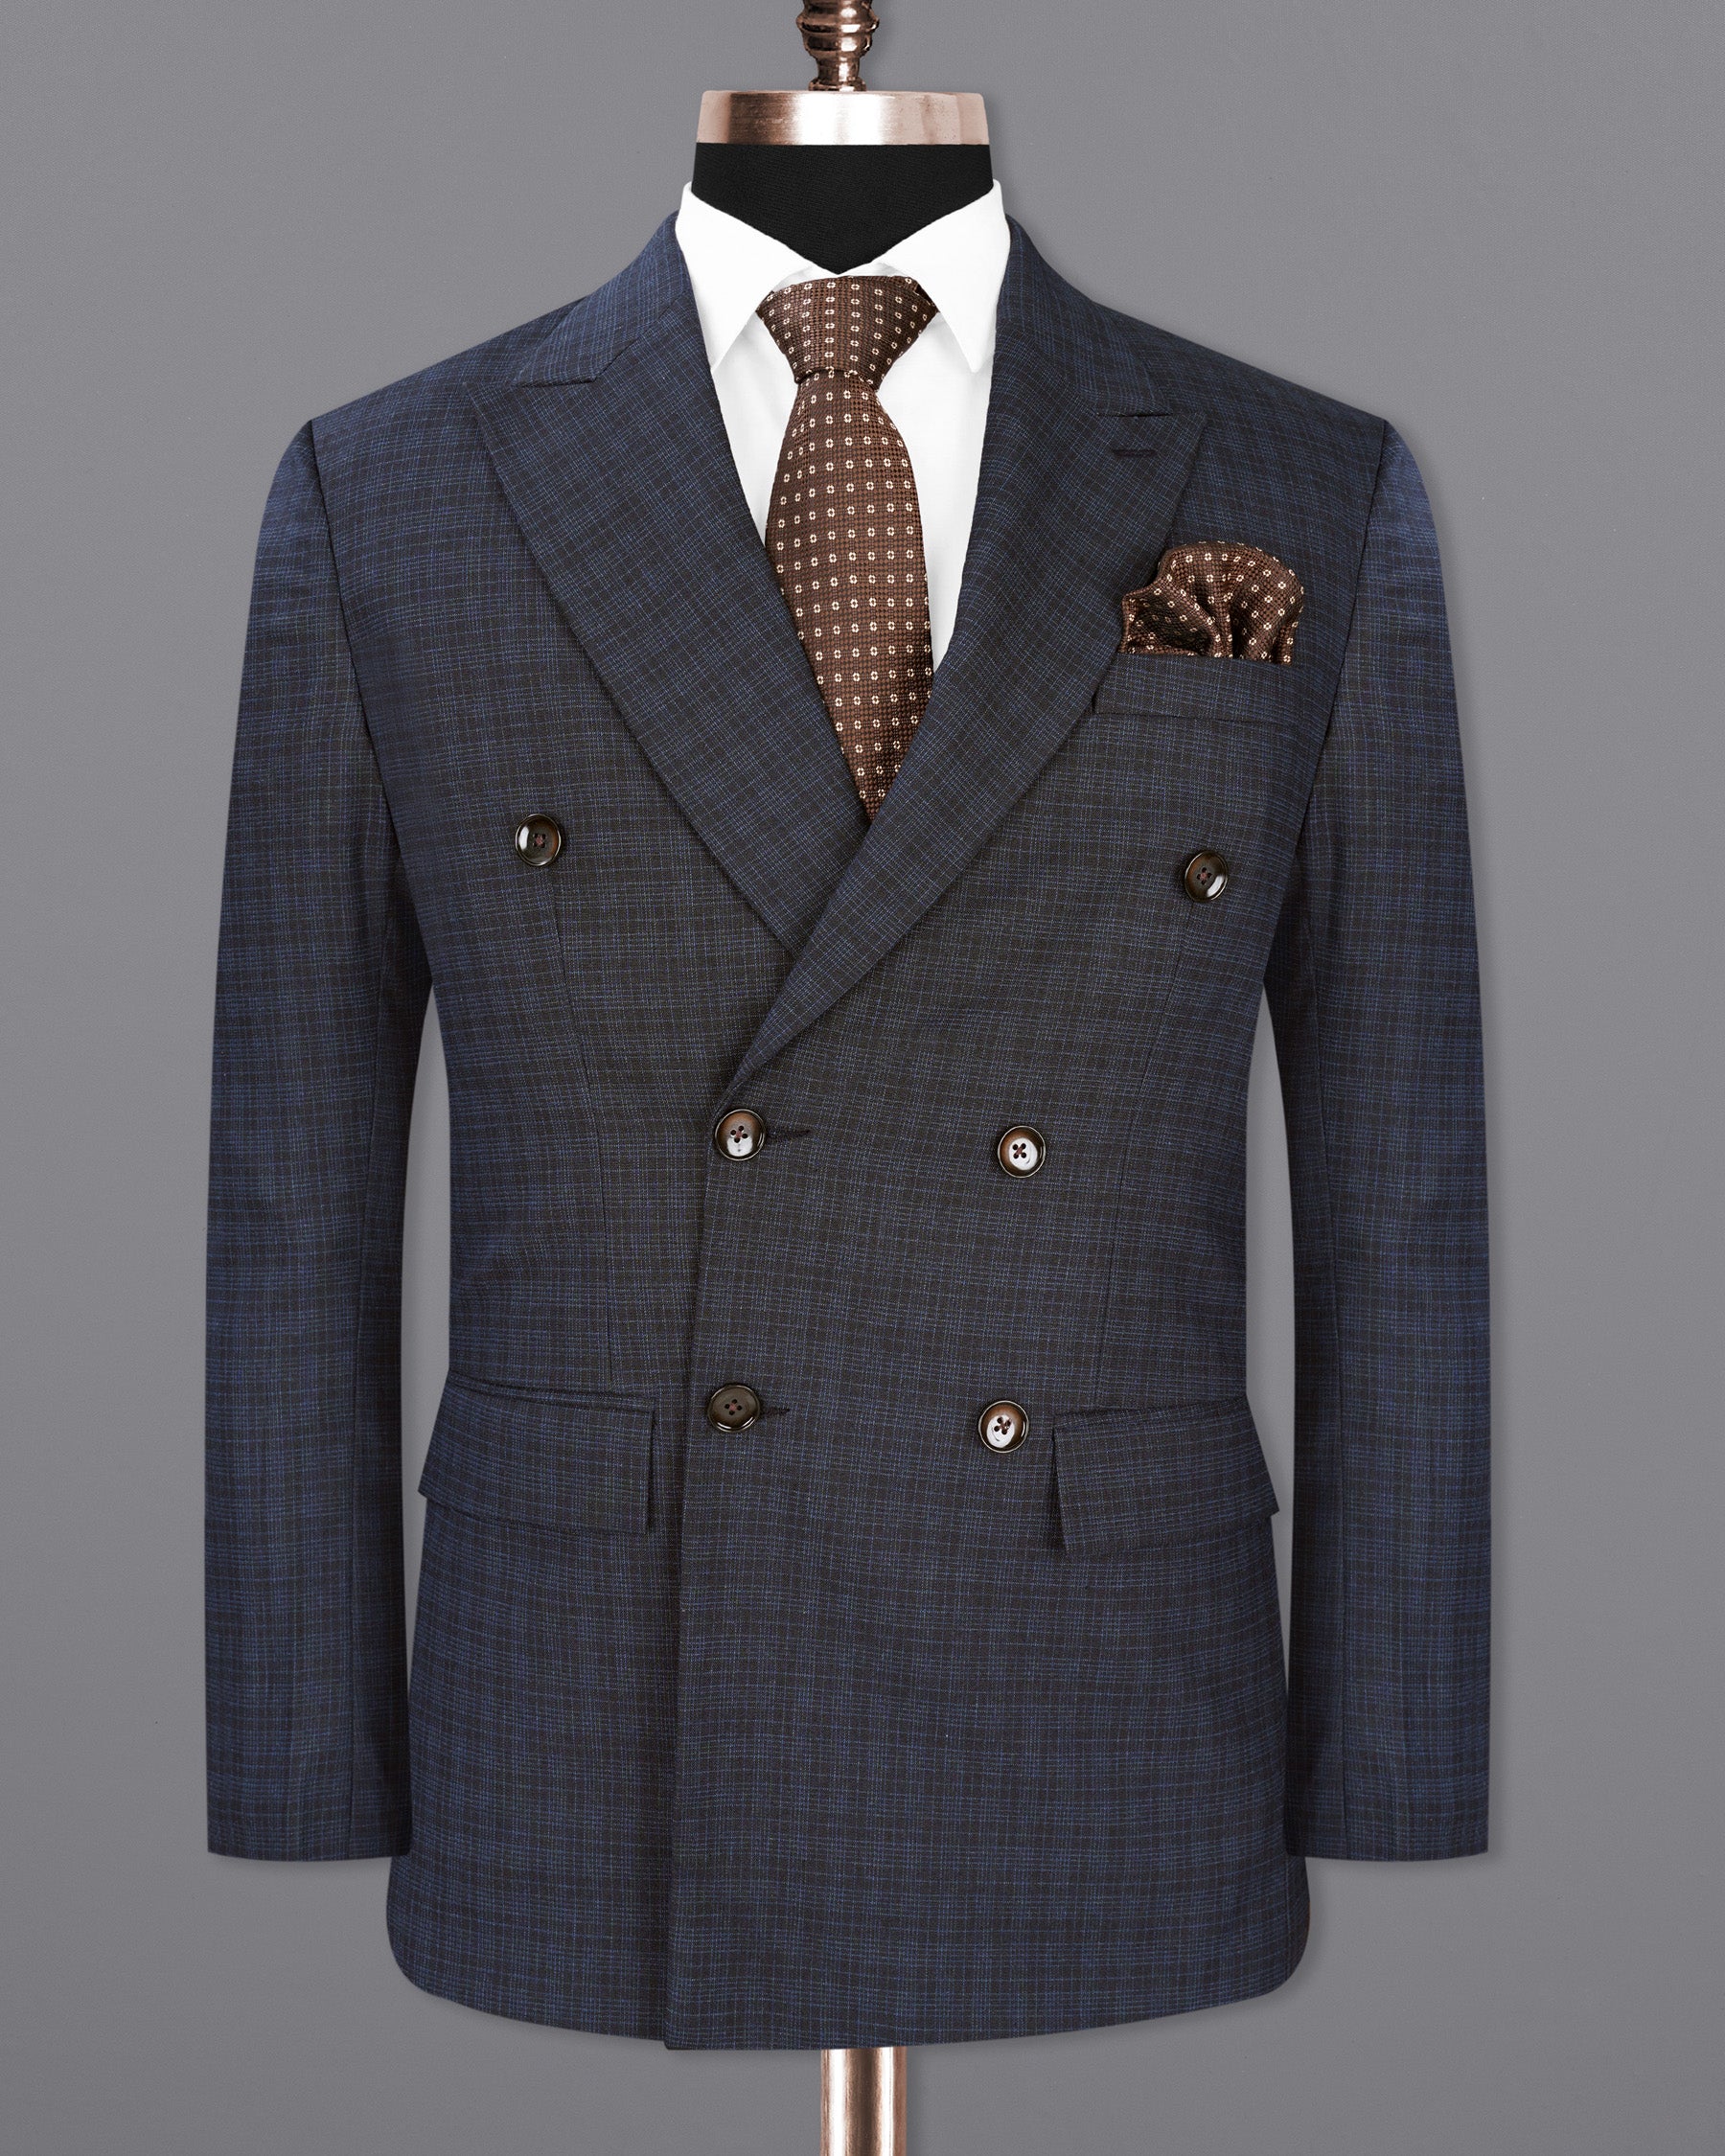 Ebony Clay Gray and Metallic Blue Plaid Double-Breasted Suit